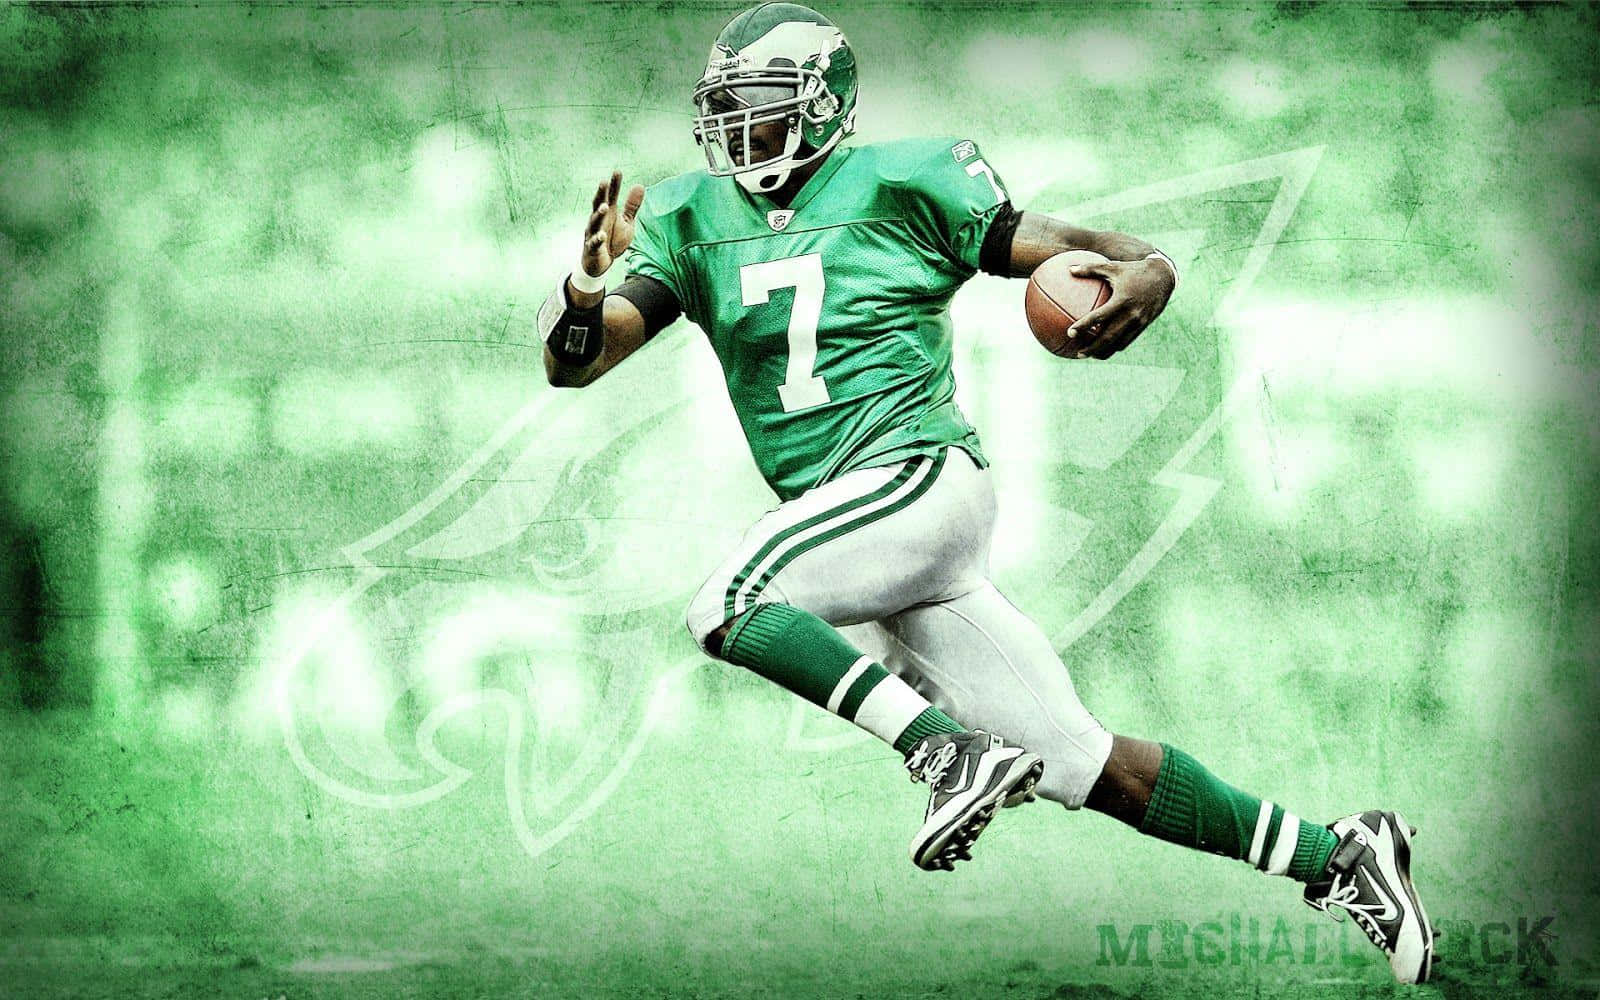 NFL great Michael Vick on the field in his prime Wallpaper